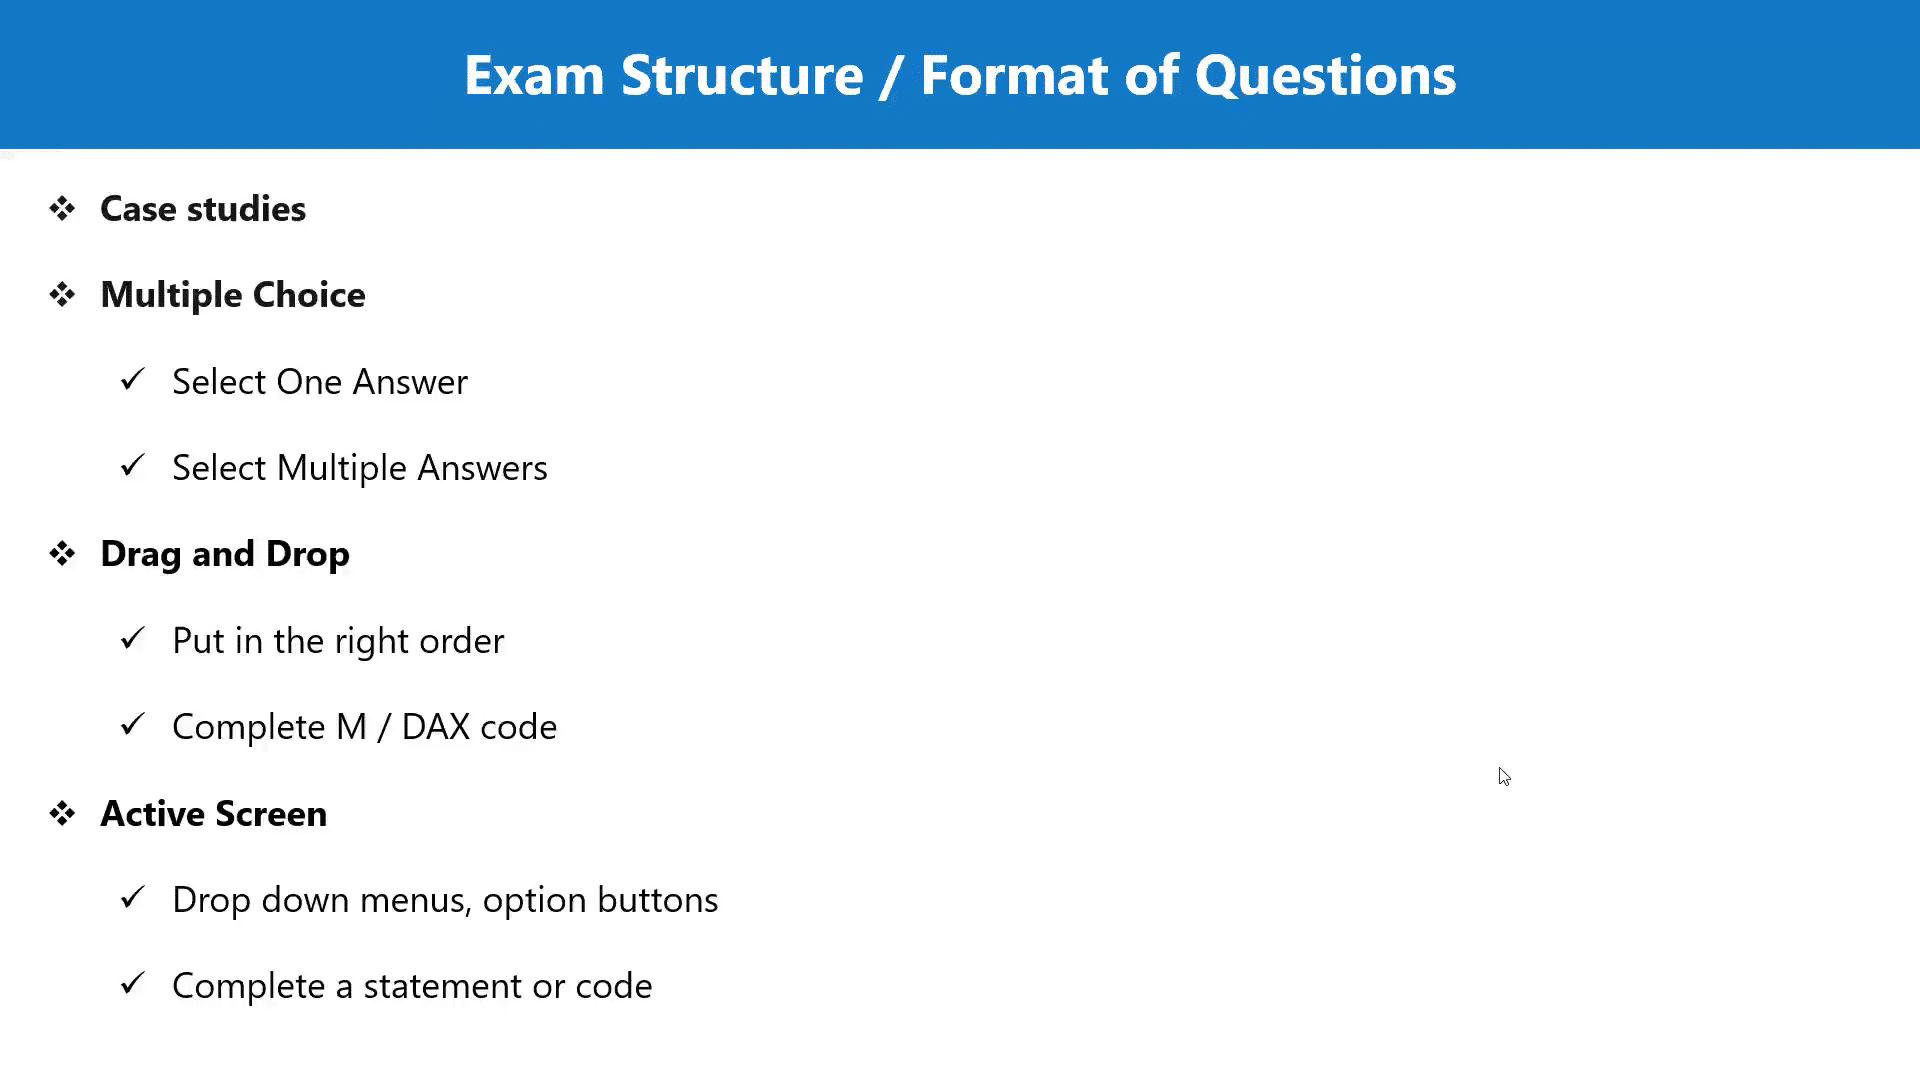 Exam structure for DP-500